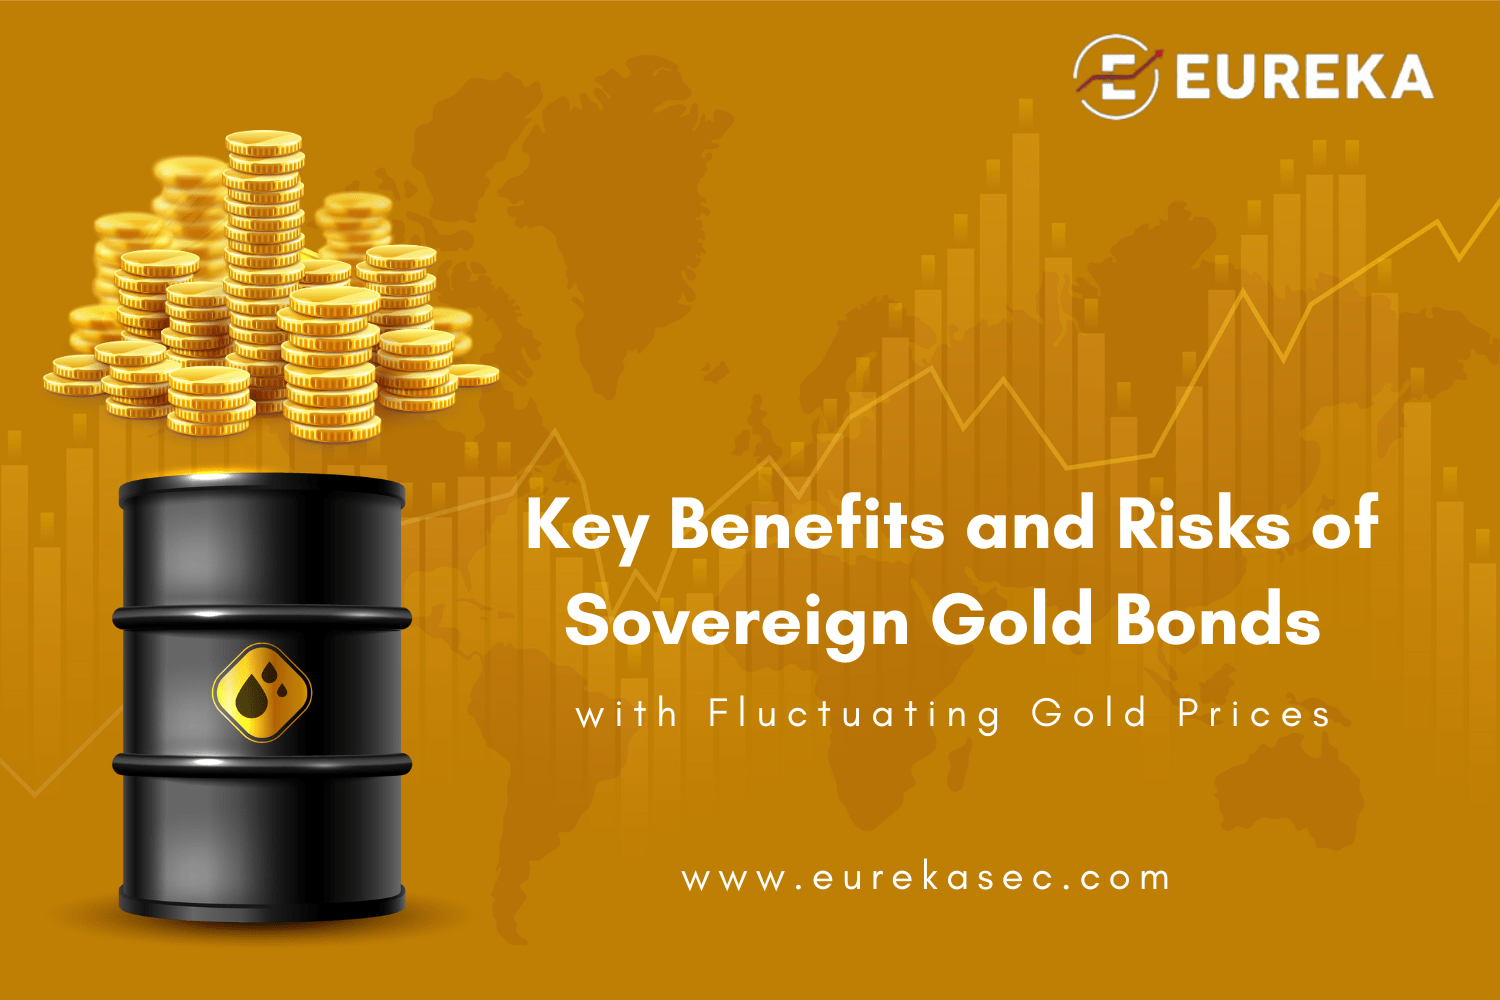 Key Benefits and Risks of Sovereign Gold Bonds with Fluctuating Gold Prices